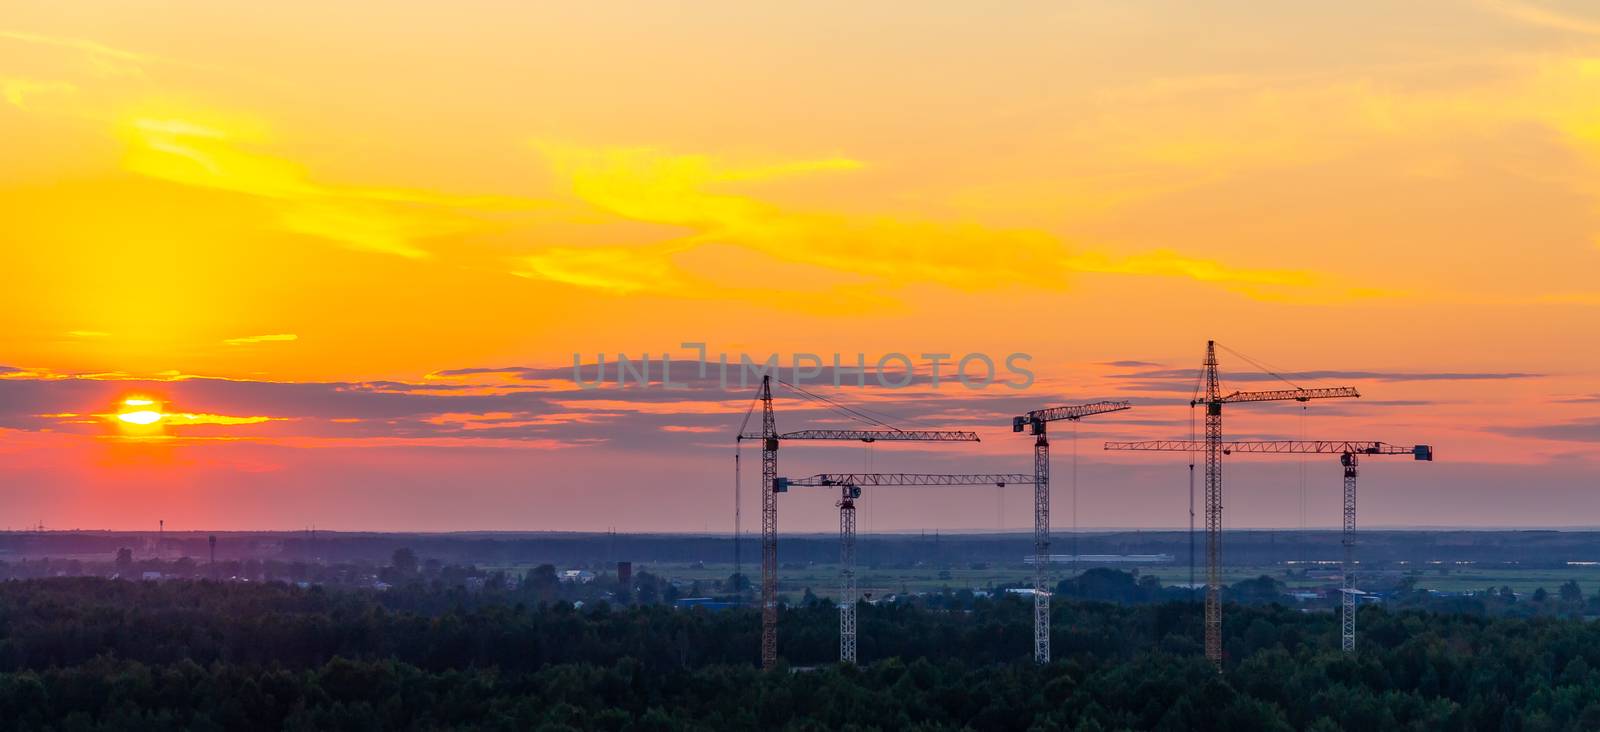 Several construction cranes on the background of colorful sunset sky by galsand